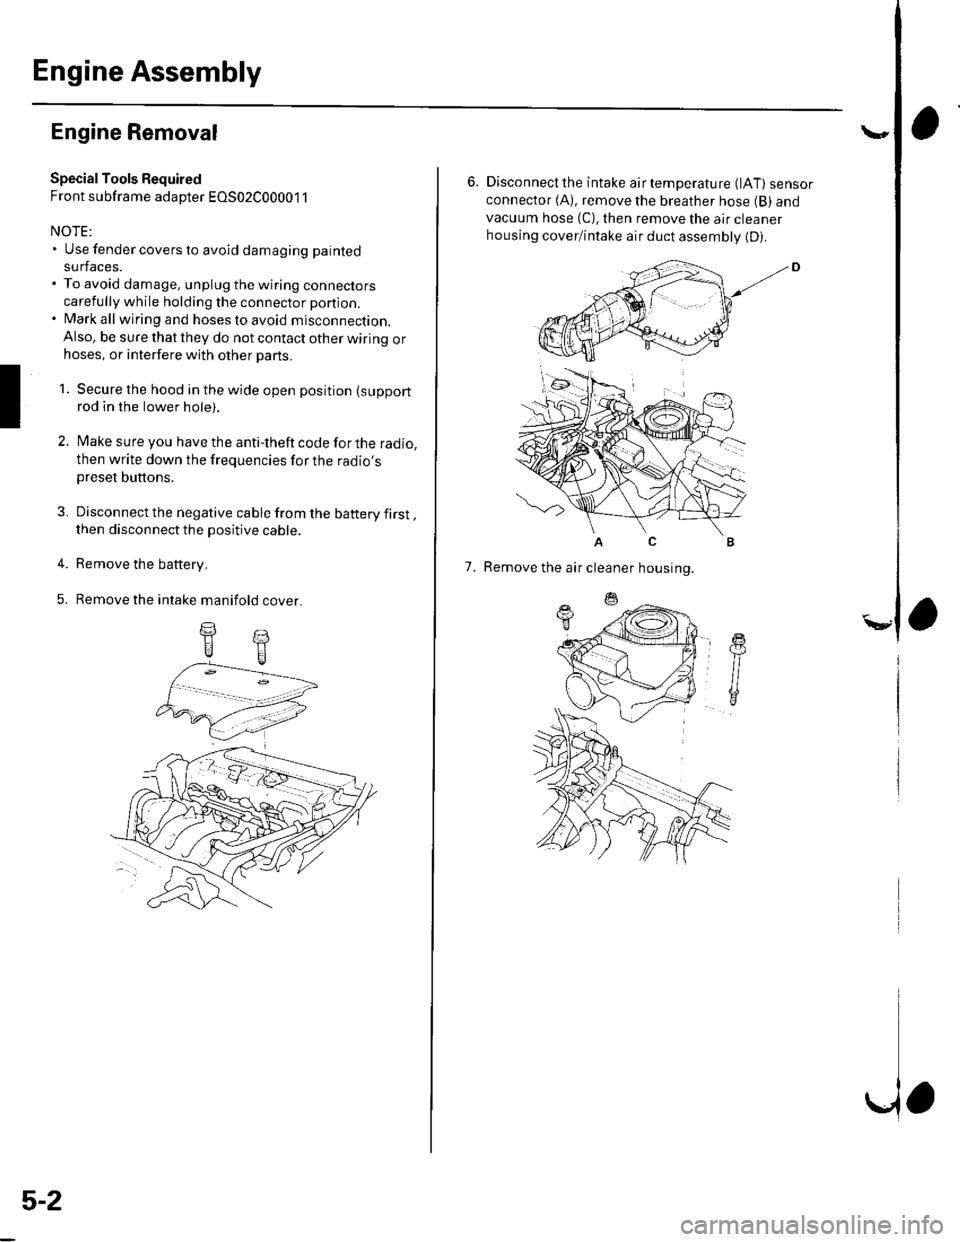 HONDA CIVIC 2003 7.G Workshop Manual Engine Assembly
I
Engine Removal
Special Tools Required
Front subframe adapter EOS02C00001 1
NOTE:. Use fender covers to avoid damaging painted
surfaces.. To avoid damage, unplug the wiring connectors